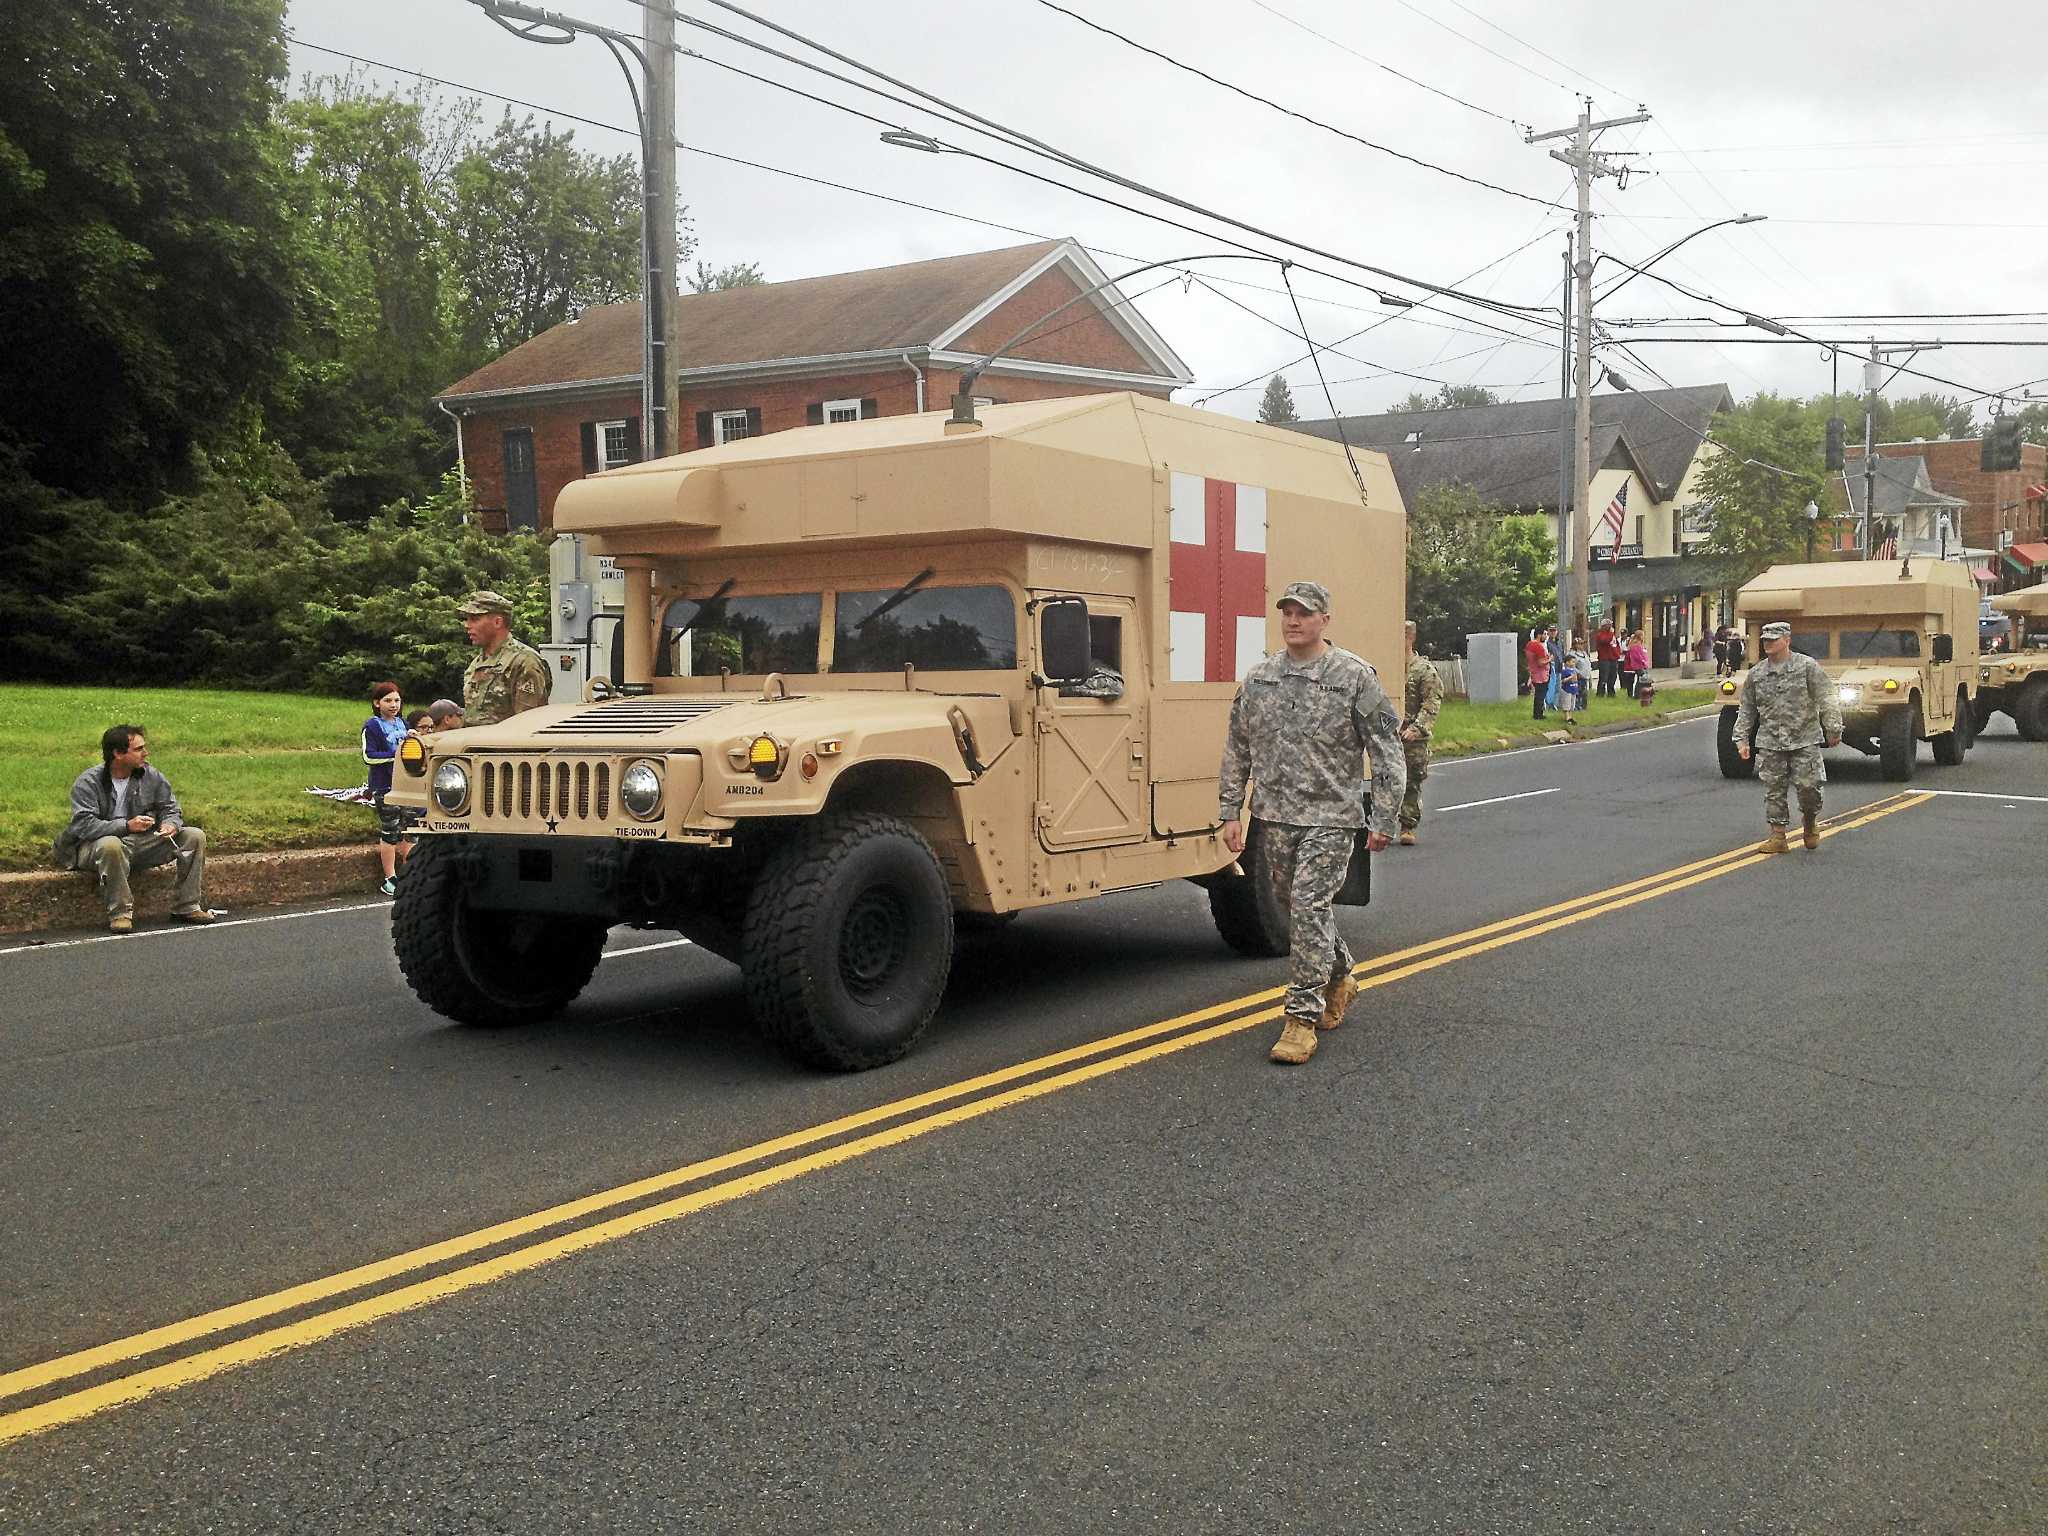 World War II veterans share stories at Cromwell’s Memorial Day parade